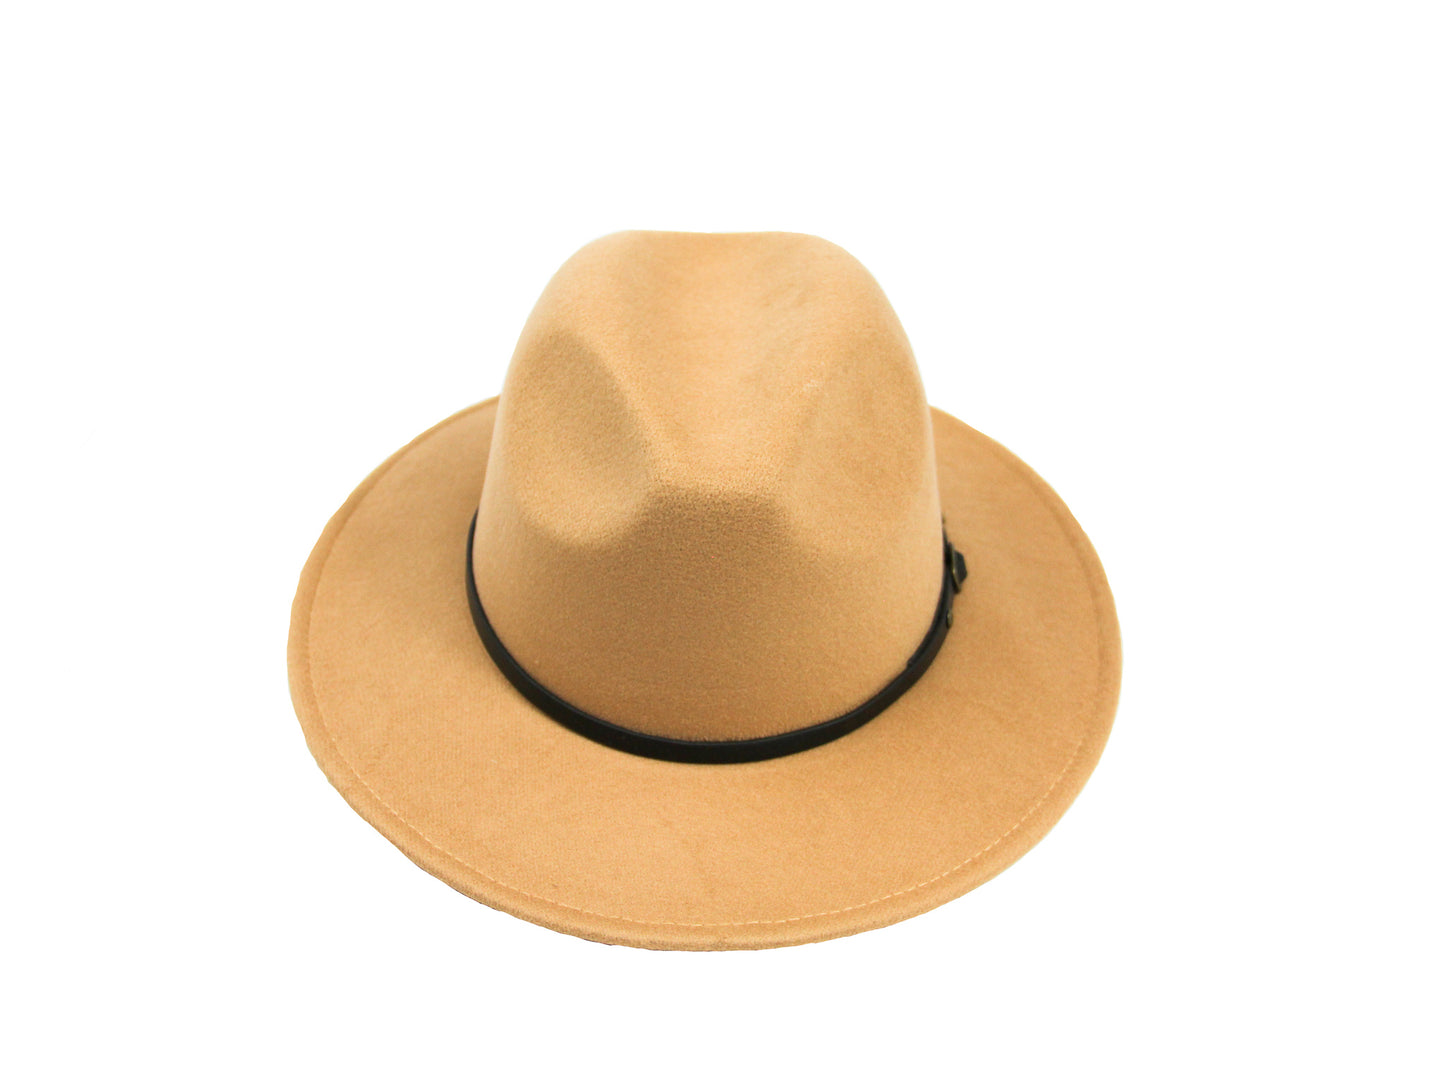 Women's Flat Wide Brim Felt Material Camel Brown Fedora Hat. Has A Side Black Belt Buckle Detail. Pinched Crown. Perfect for A Statement Piece. 